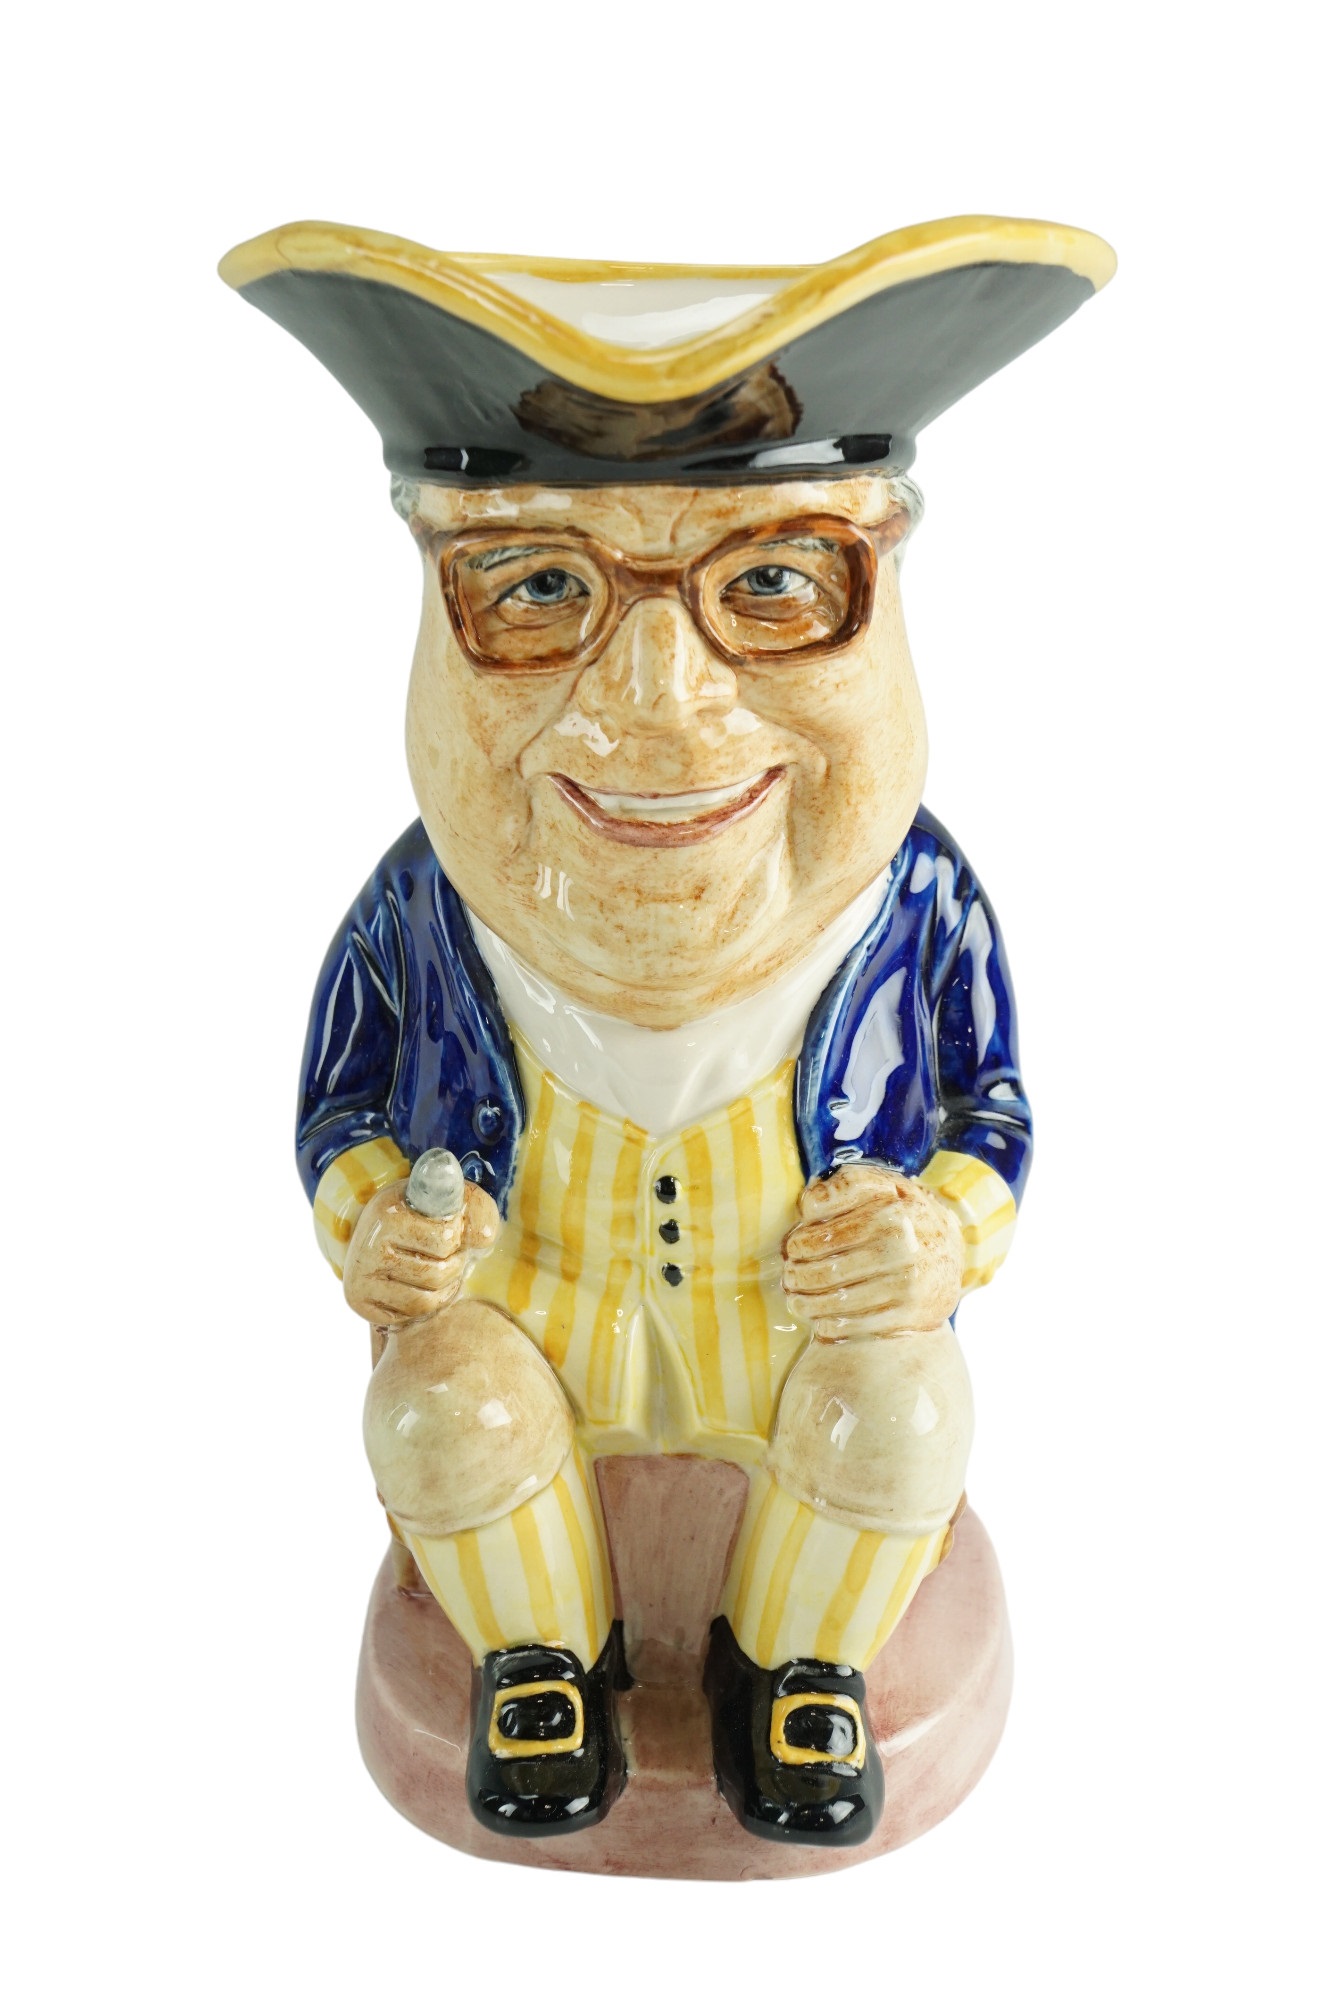 A boxed limited edition Henry Sandon character jug by Kevin Francs Ceramics, numbered 310/750,